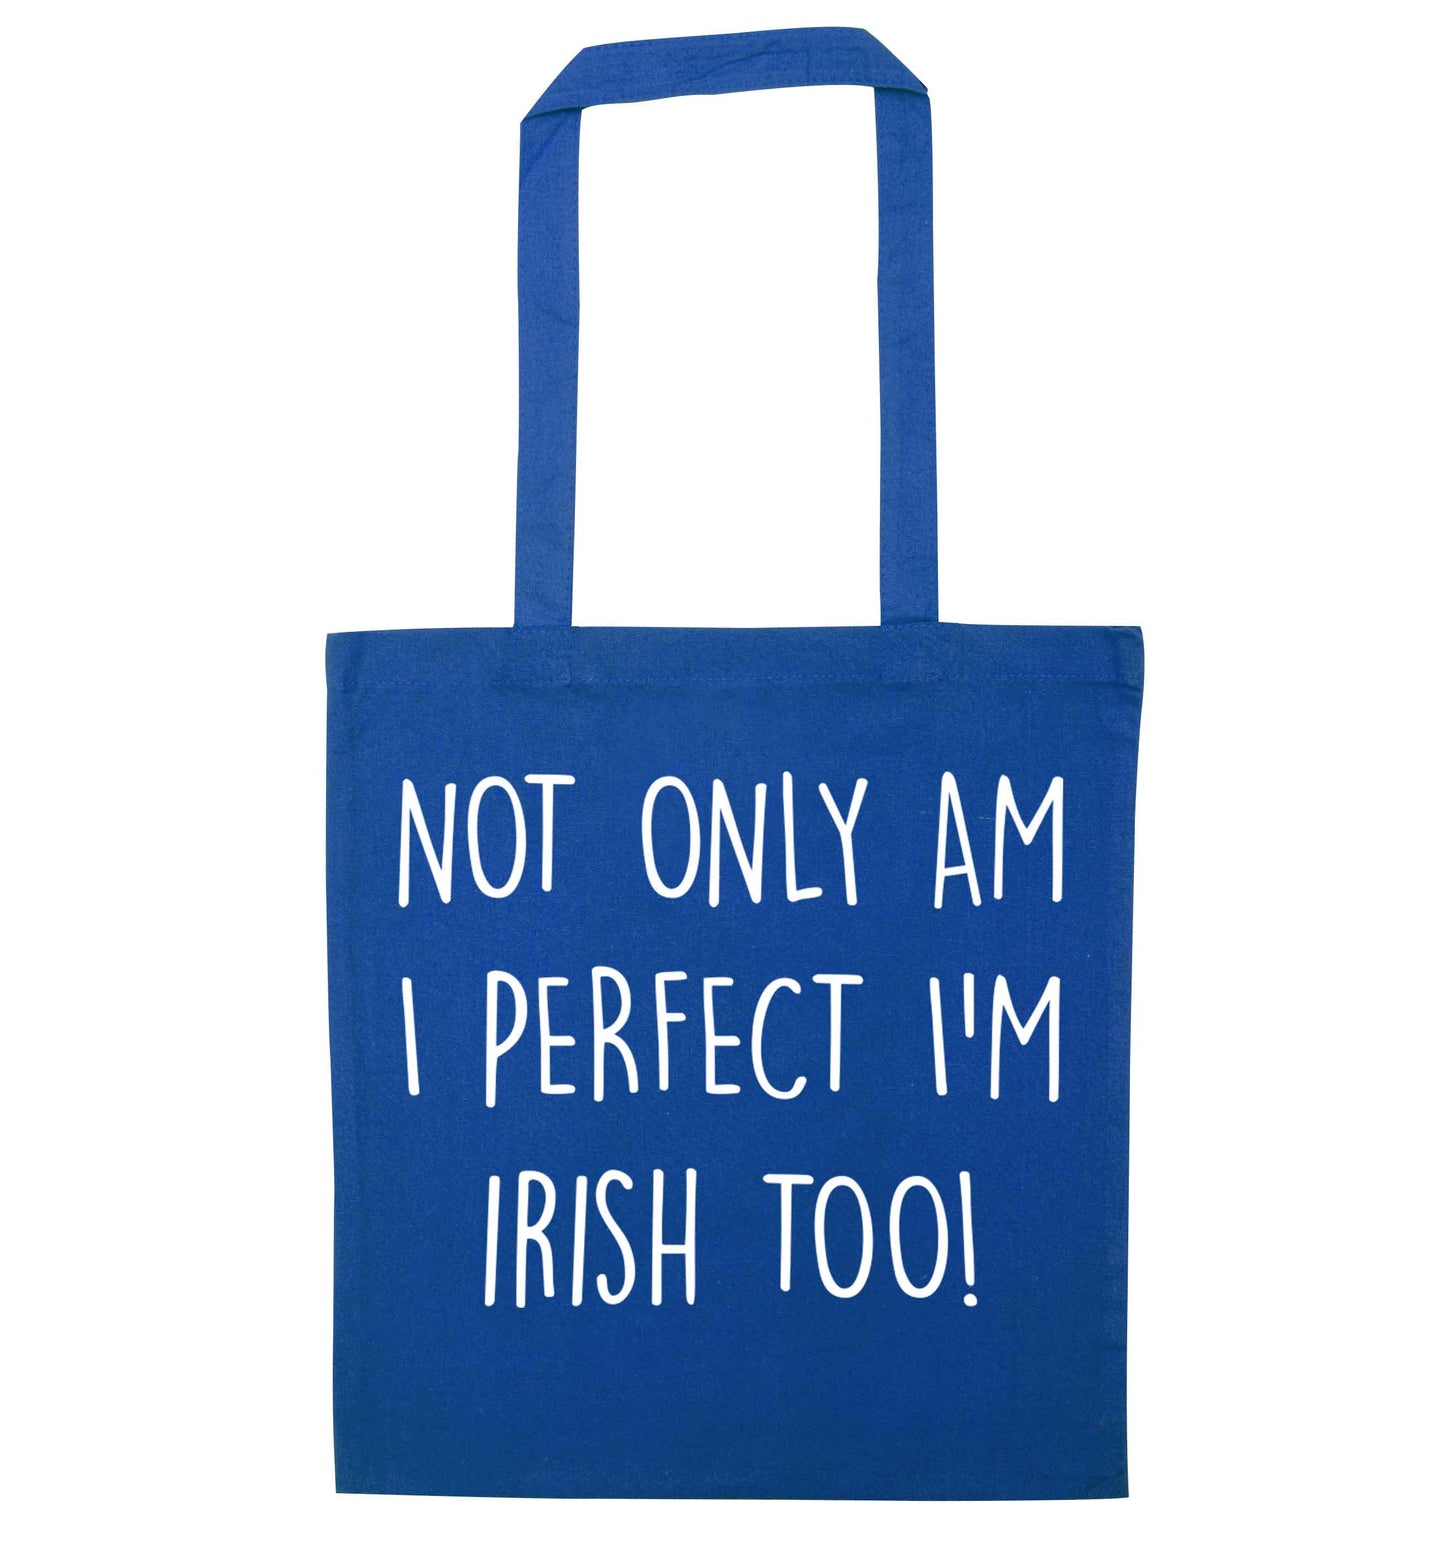 Not only am I perfect I'm Irish too! blue tote bag